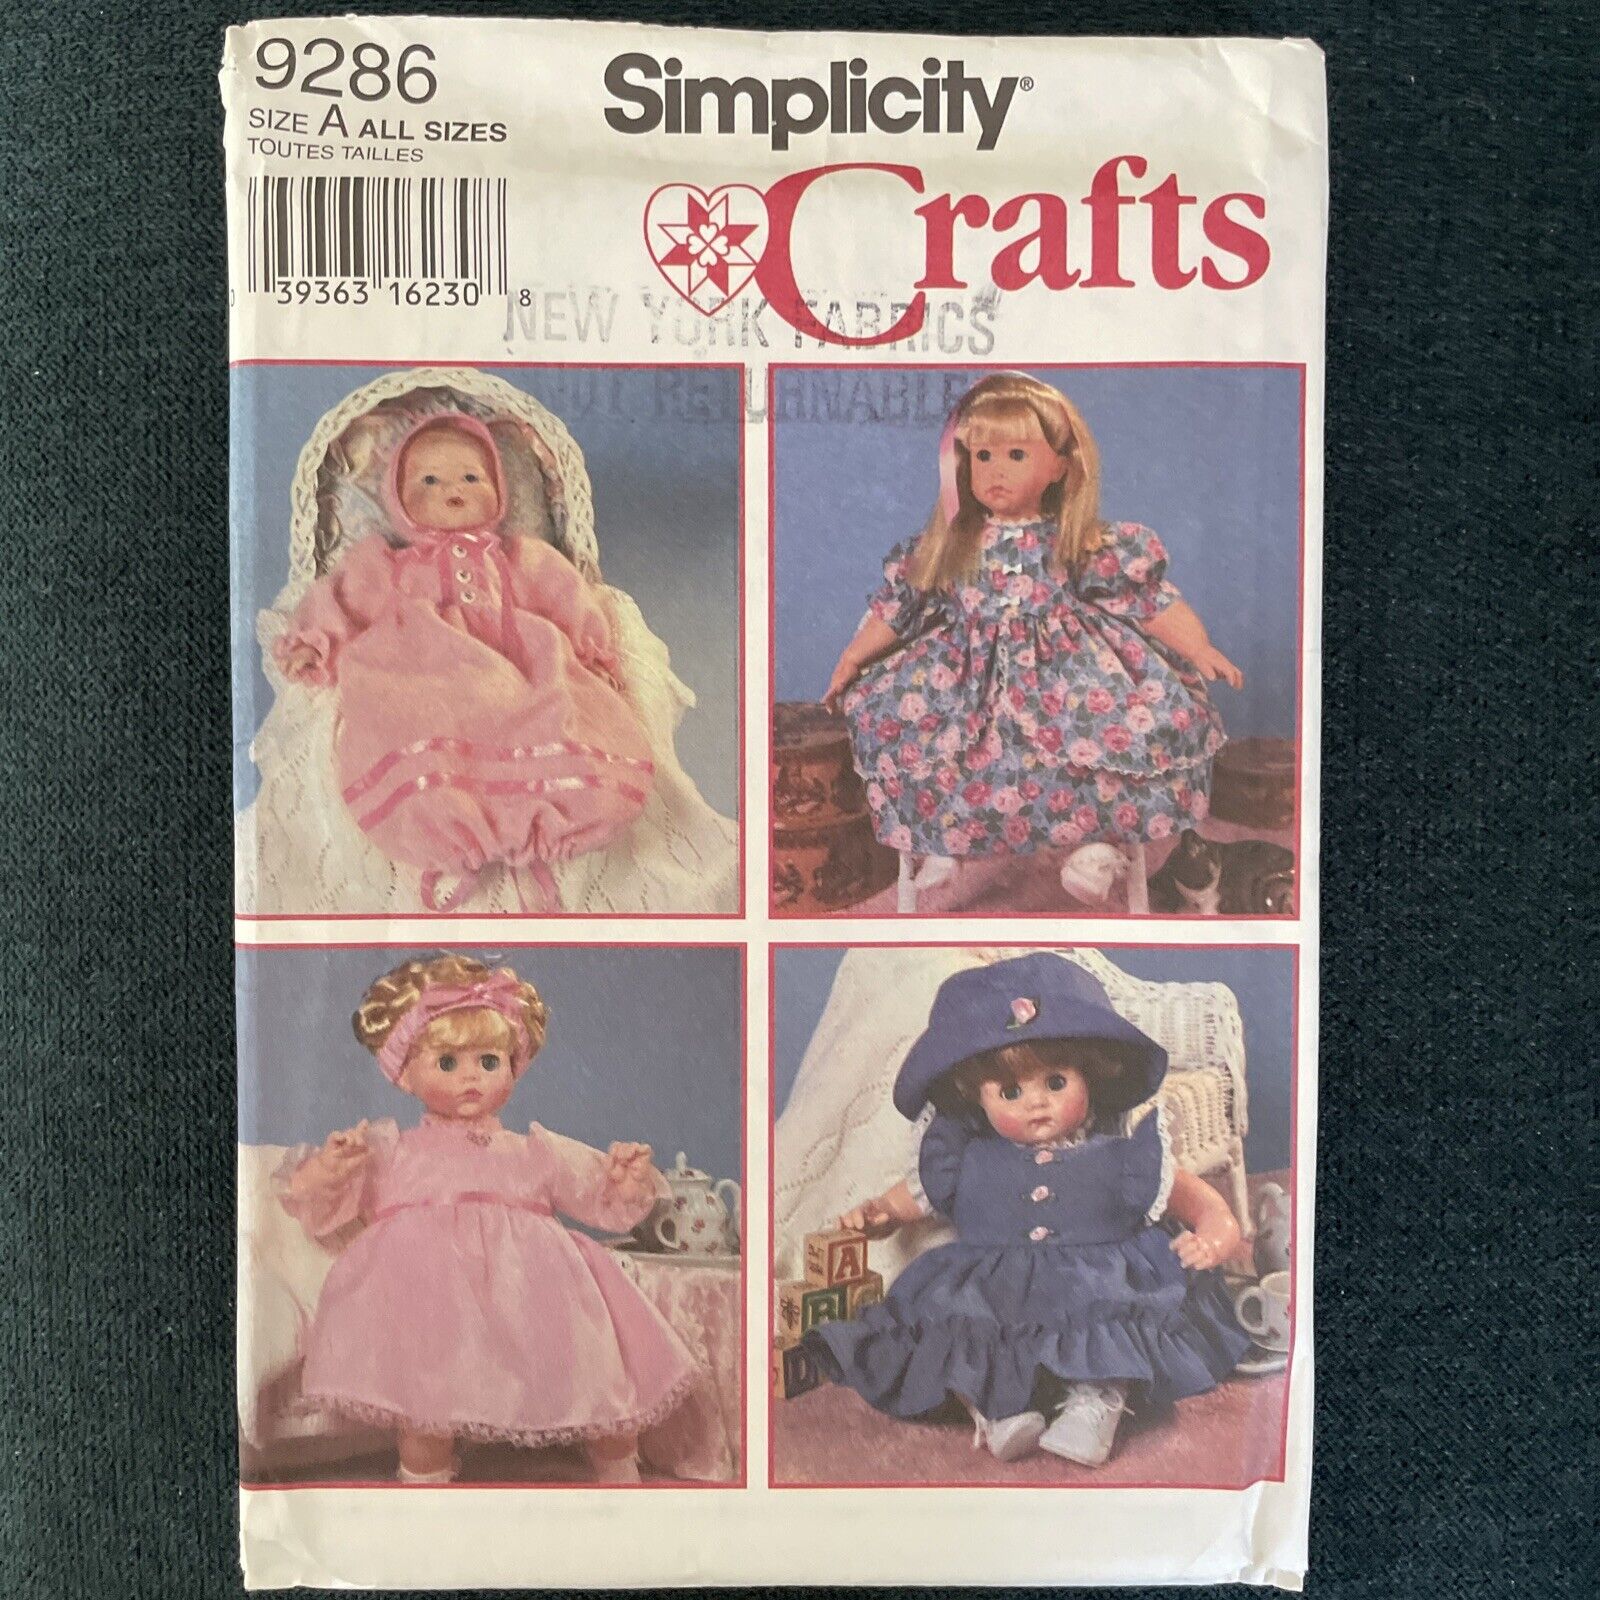 Simplicity 9286 Crafts NEW Doll Clothes Size 12\